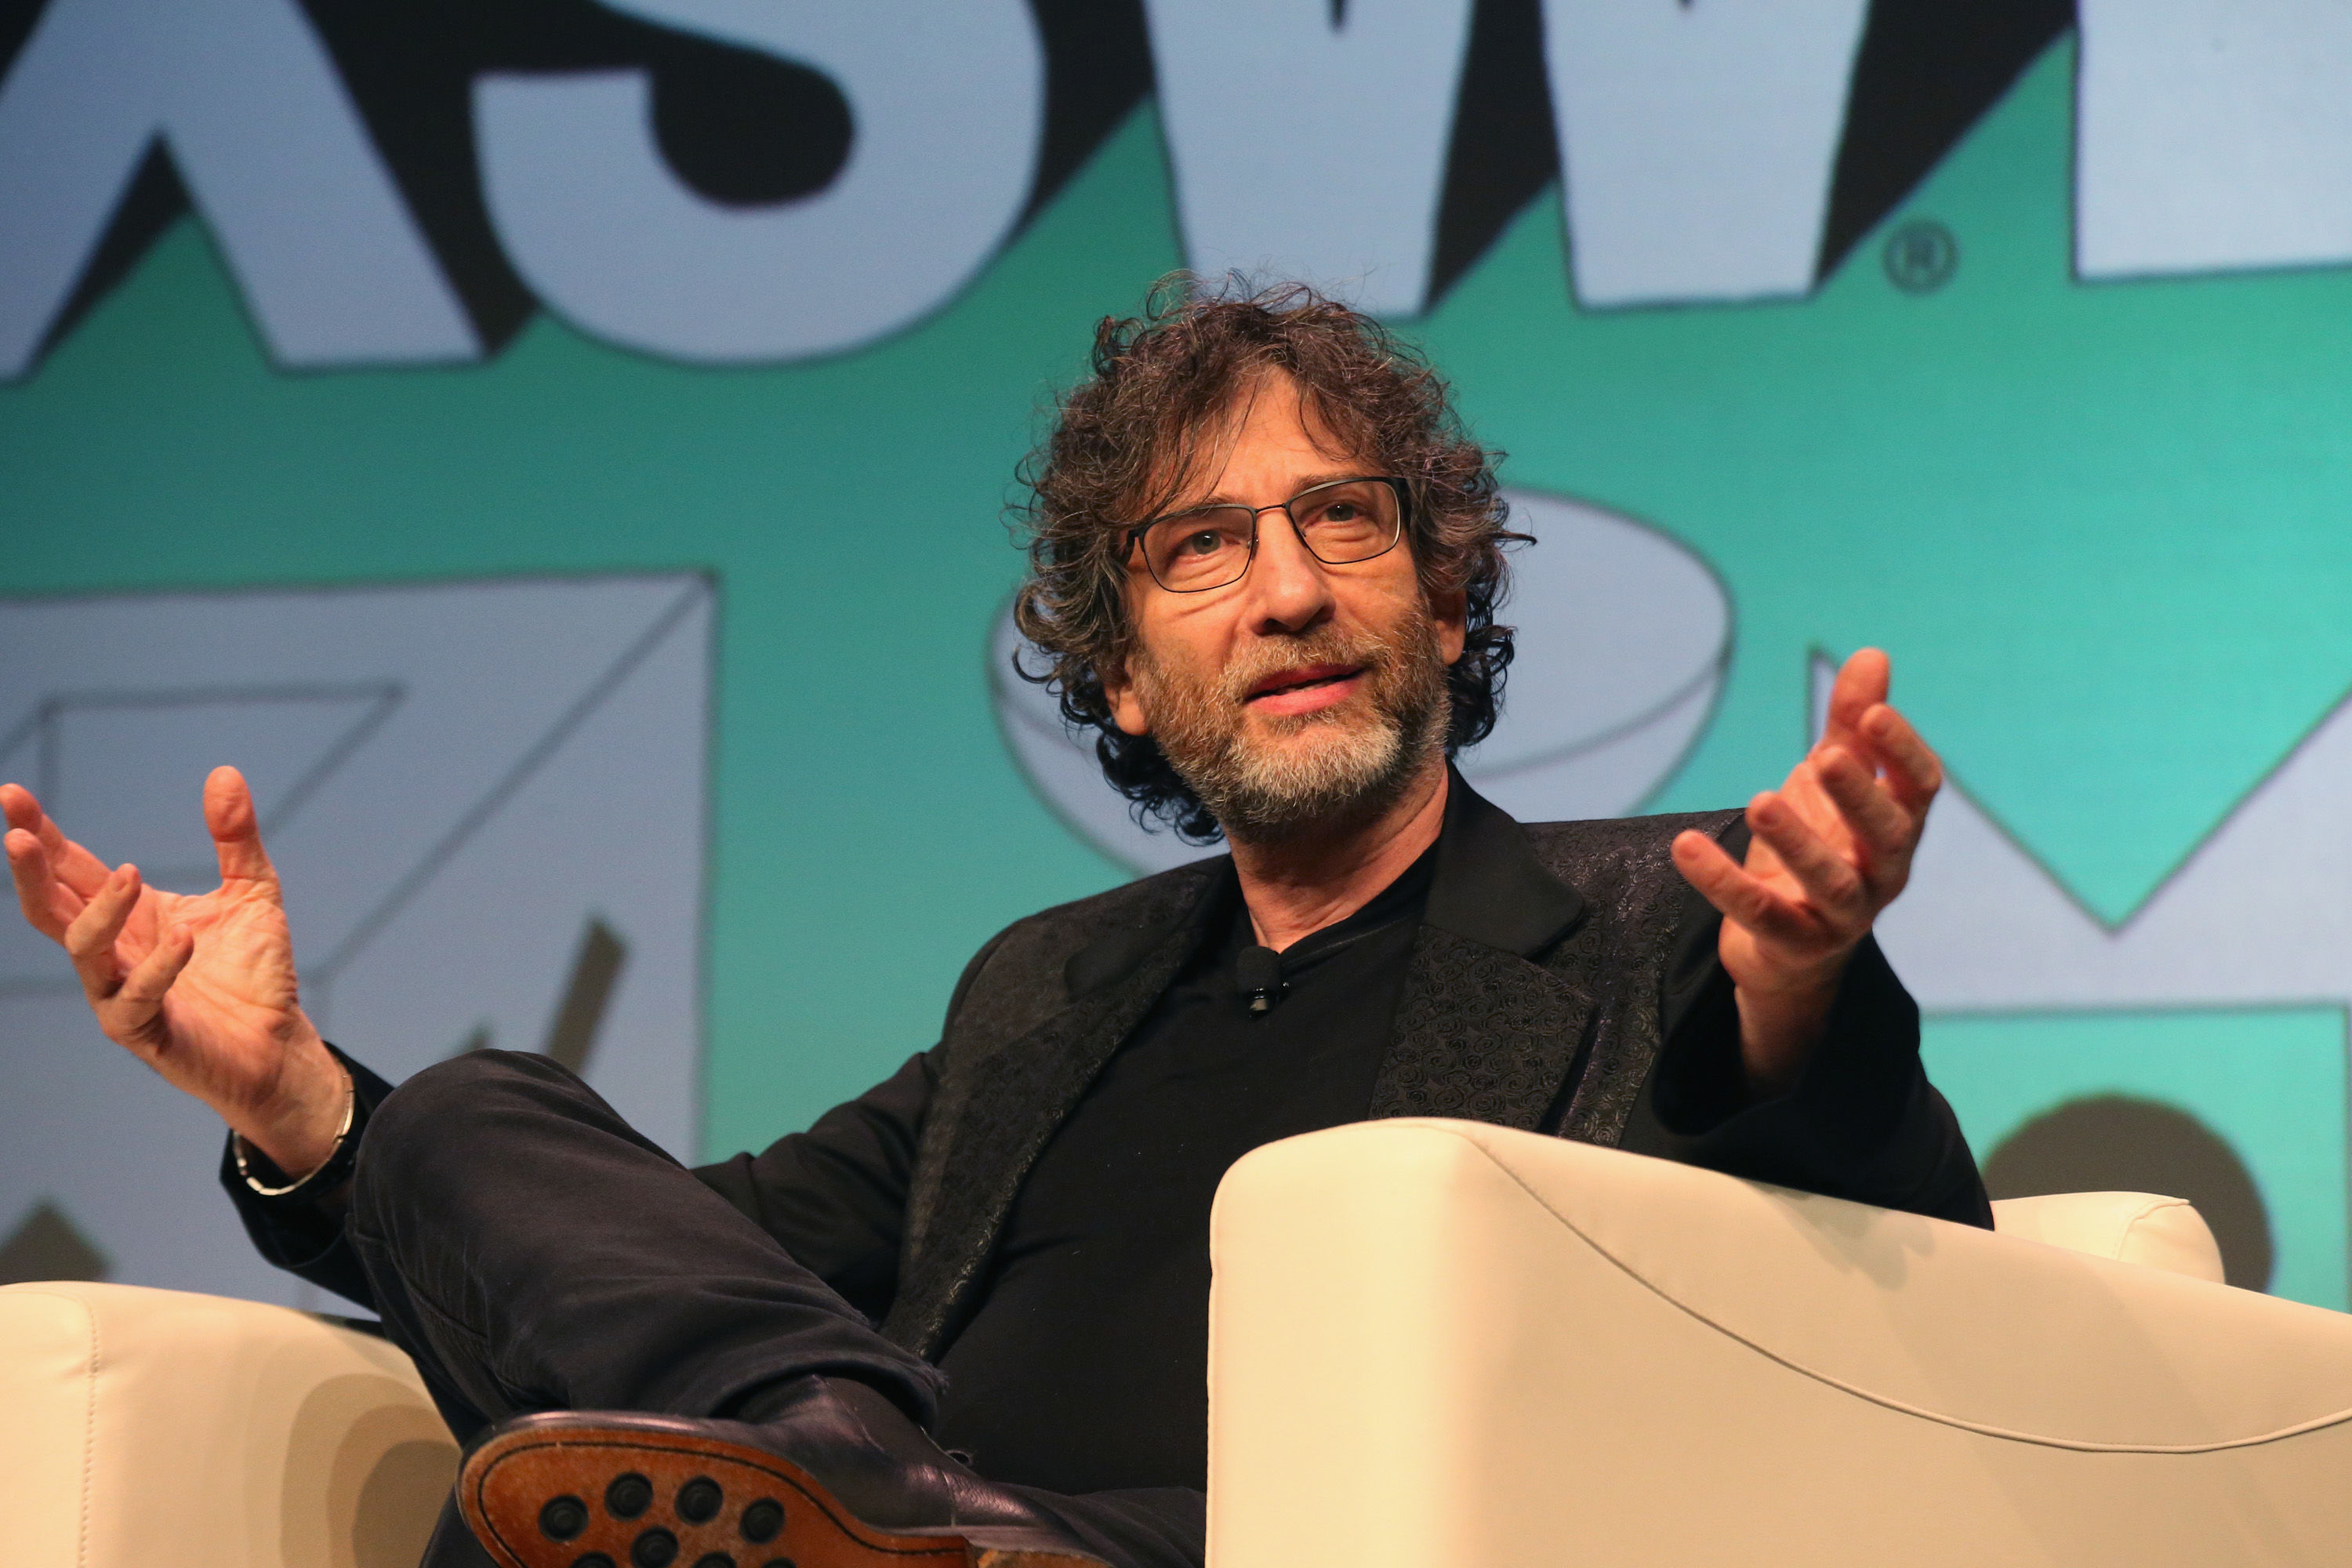 5 Neil Gaiman books that should be adapted into a movie or TV show